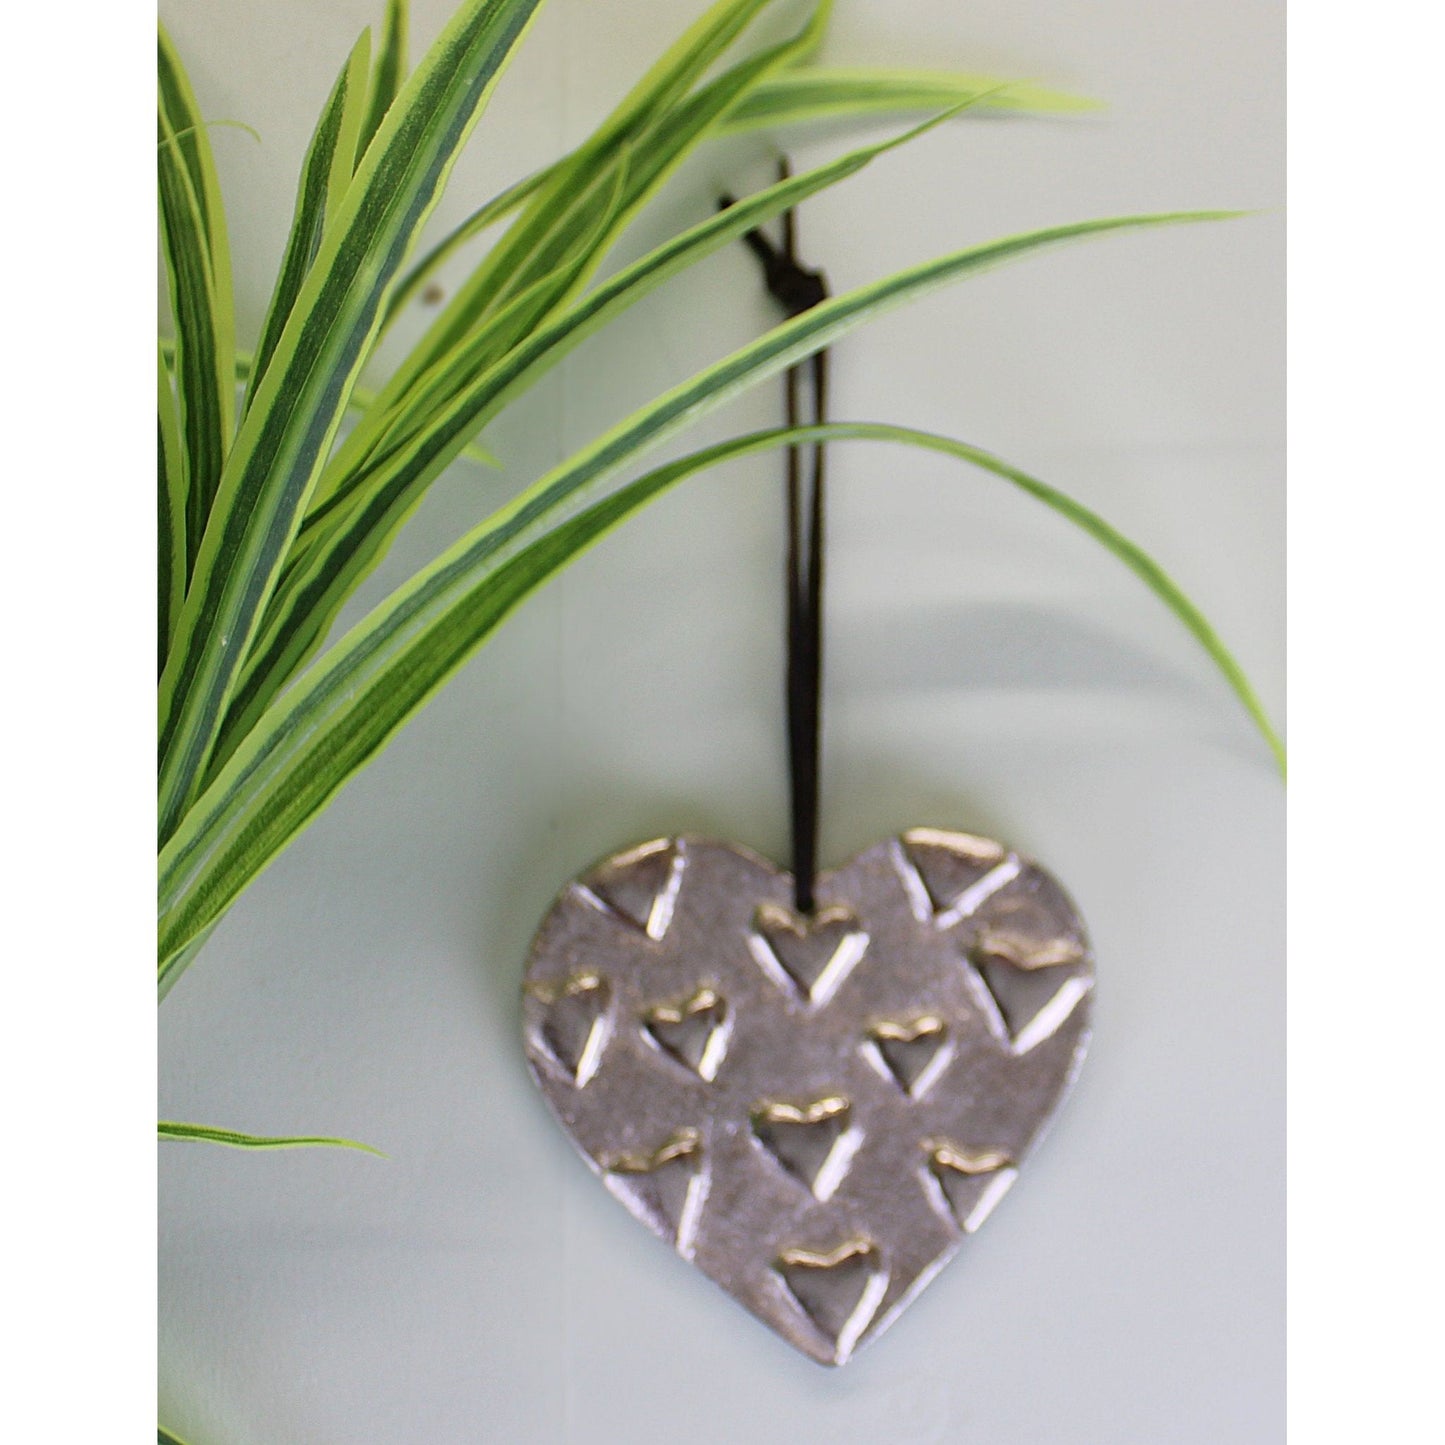 Hanging Silver Metal Heart Ornament, 10cm - Ashton and Finch